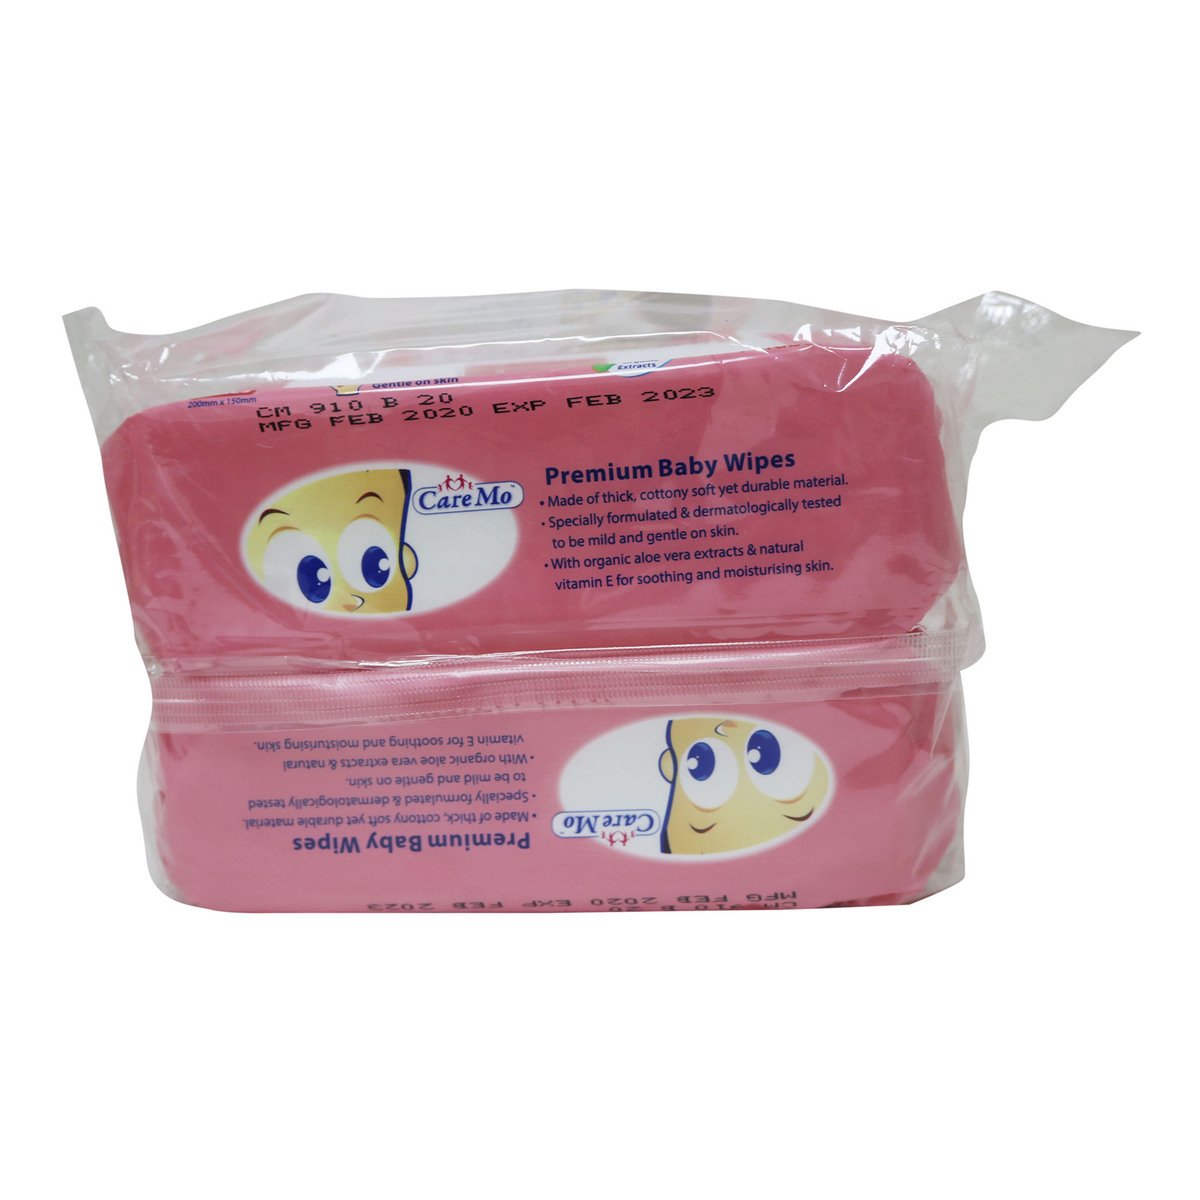 Caremo Baby Wipes Frgrance Free 2 x 80 Counts Lid